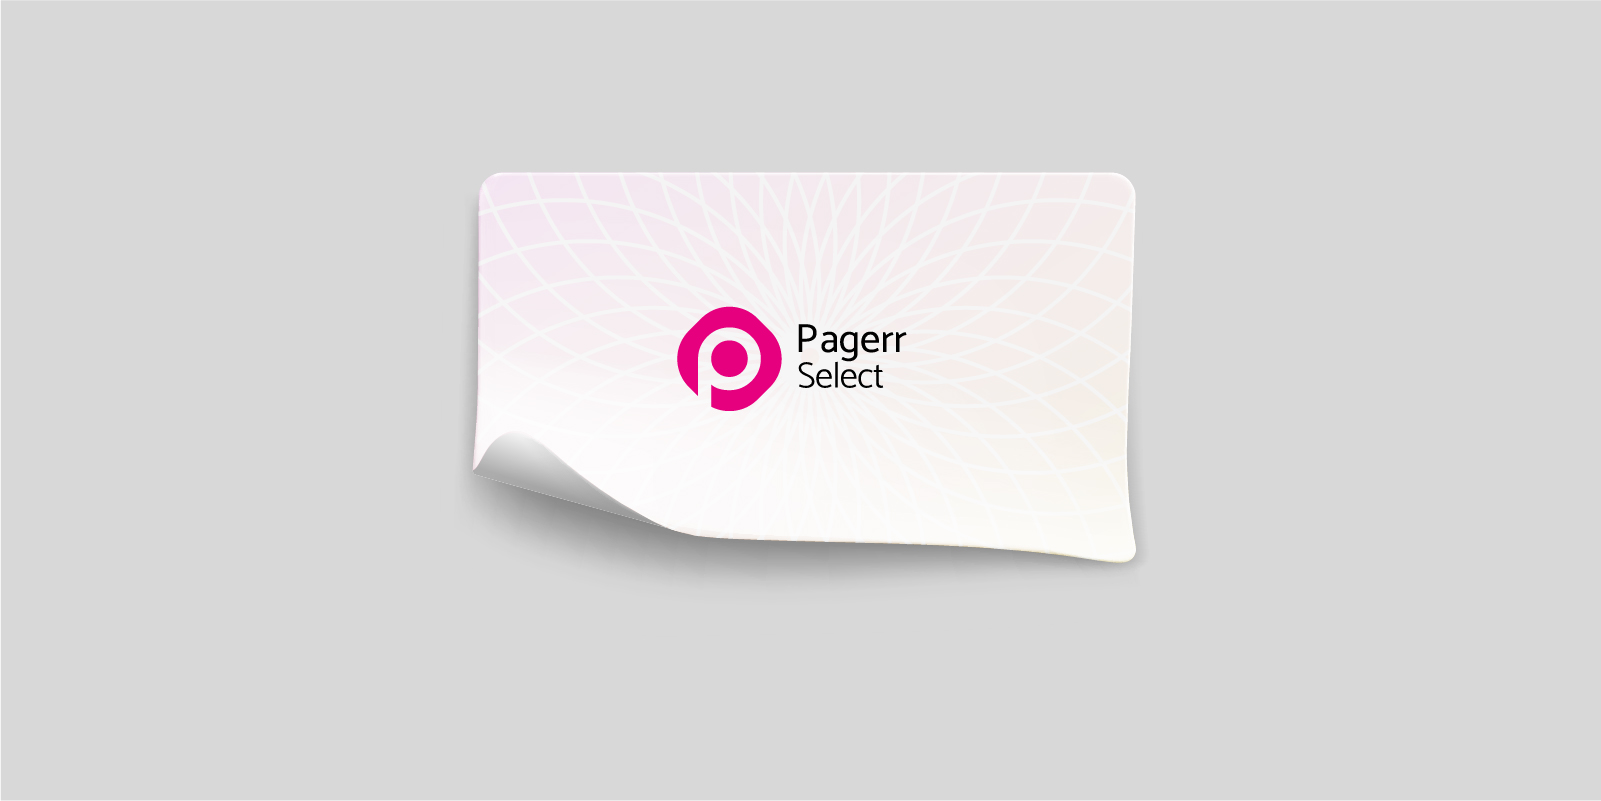 Sheet stickers in Tallinn - Print with Pagerr